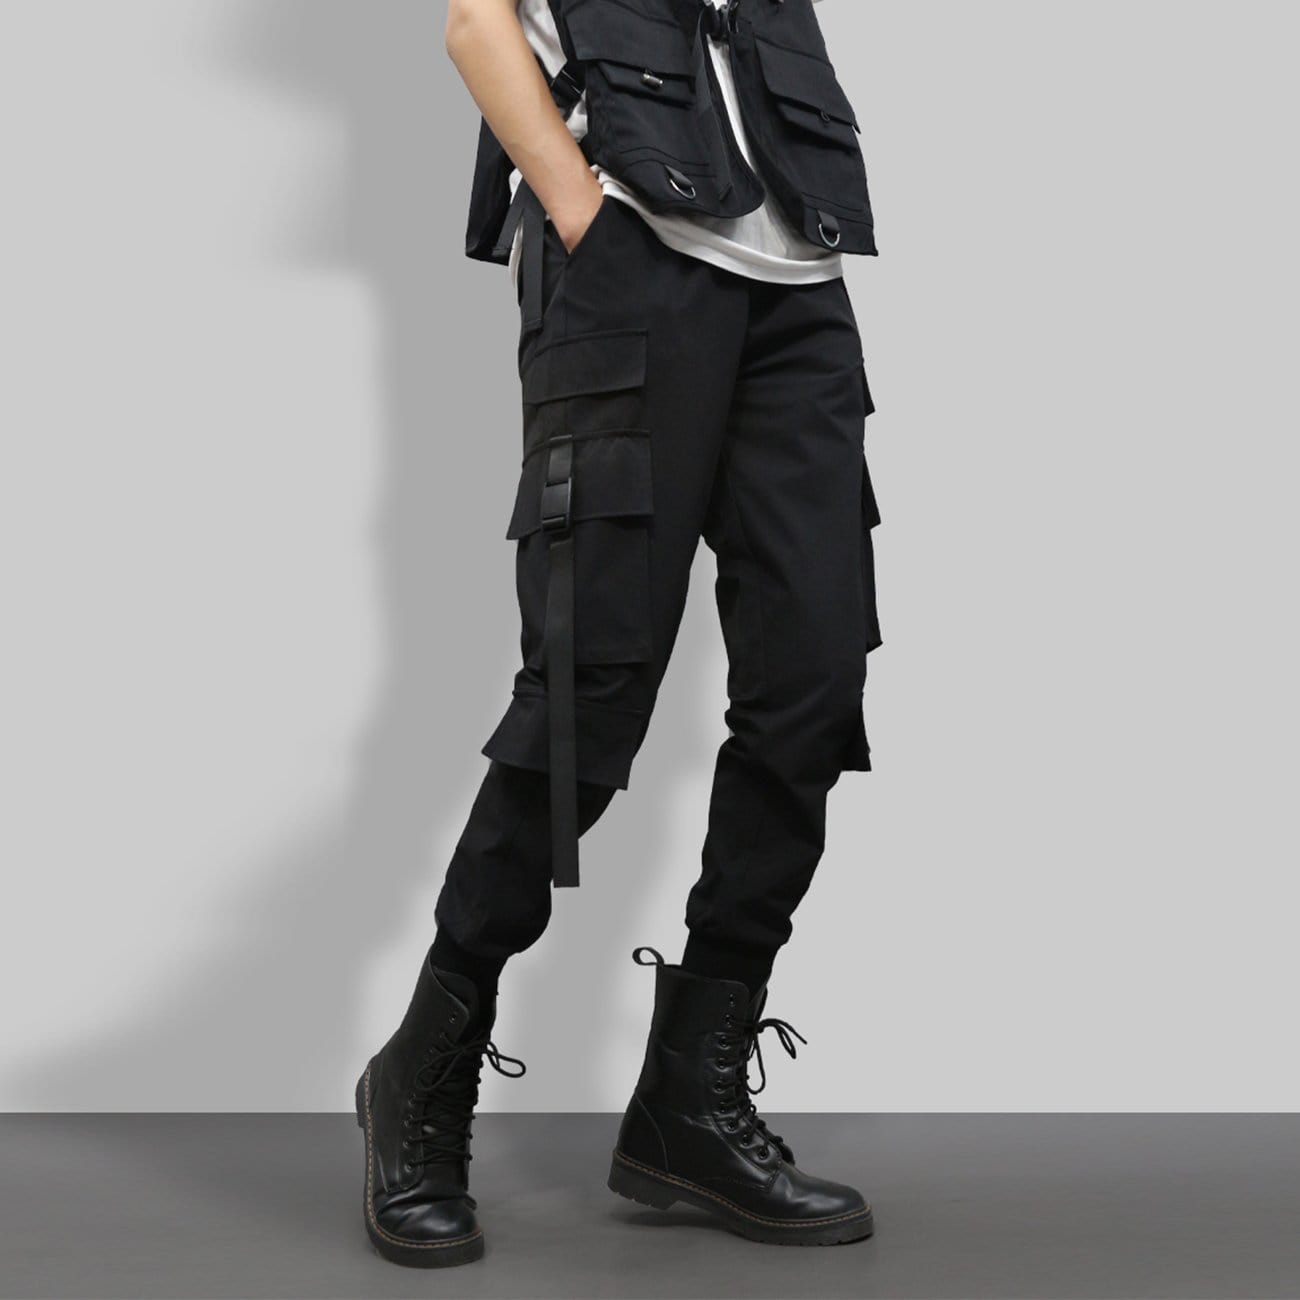 TO Functional Multi Pockets Cargo Pants